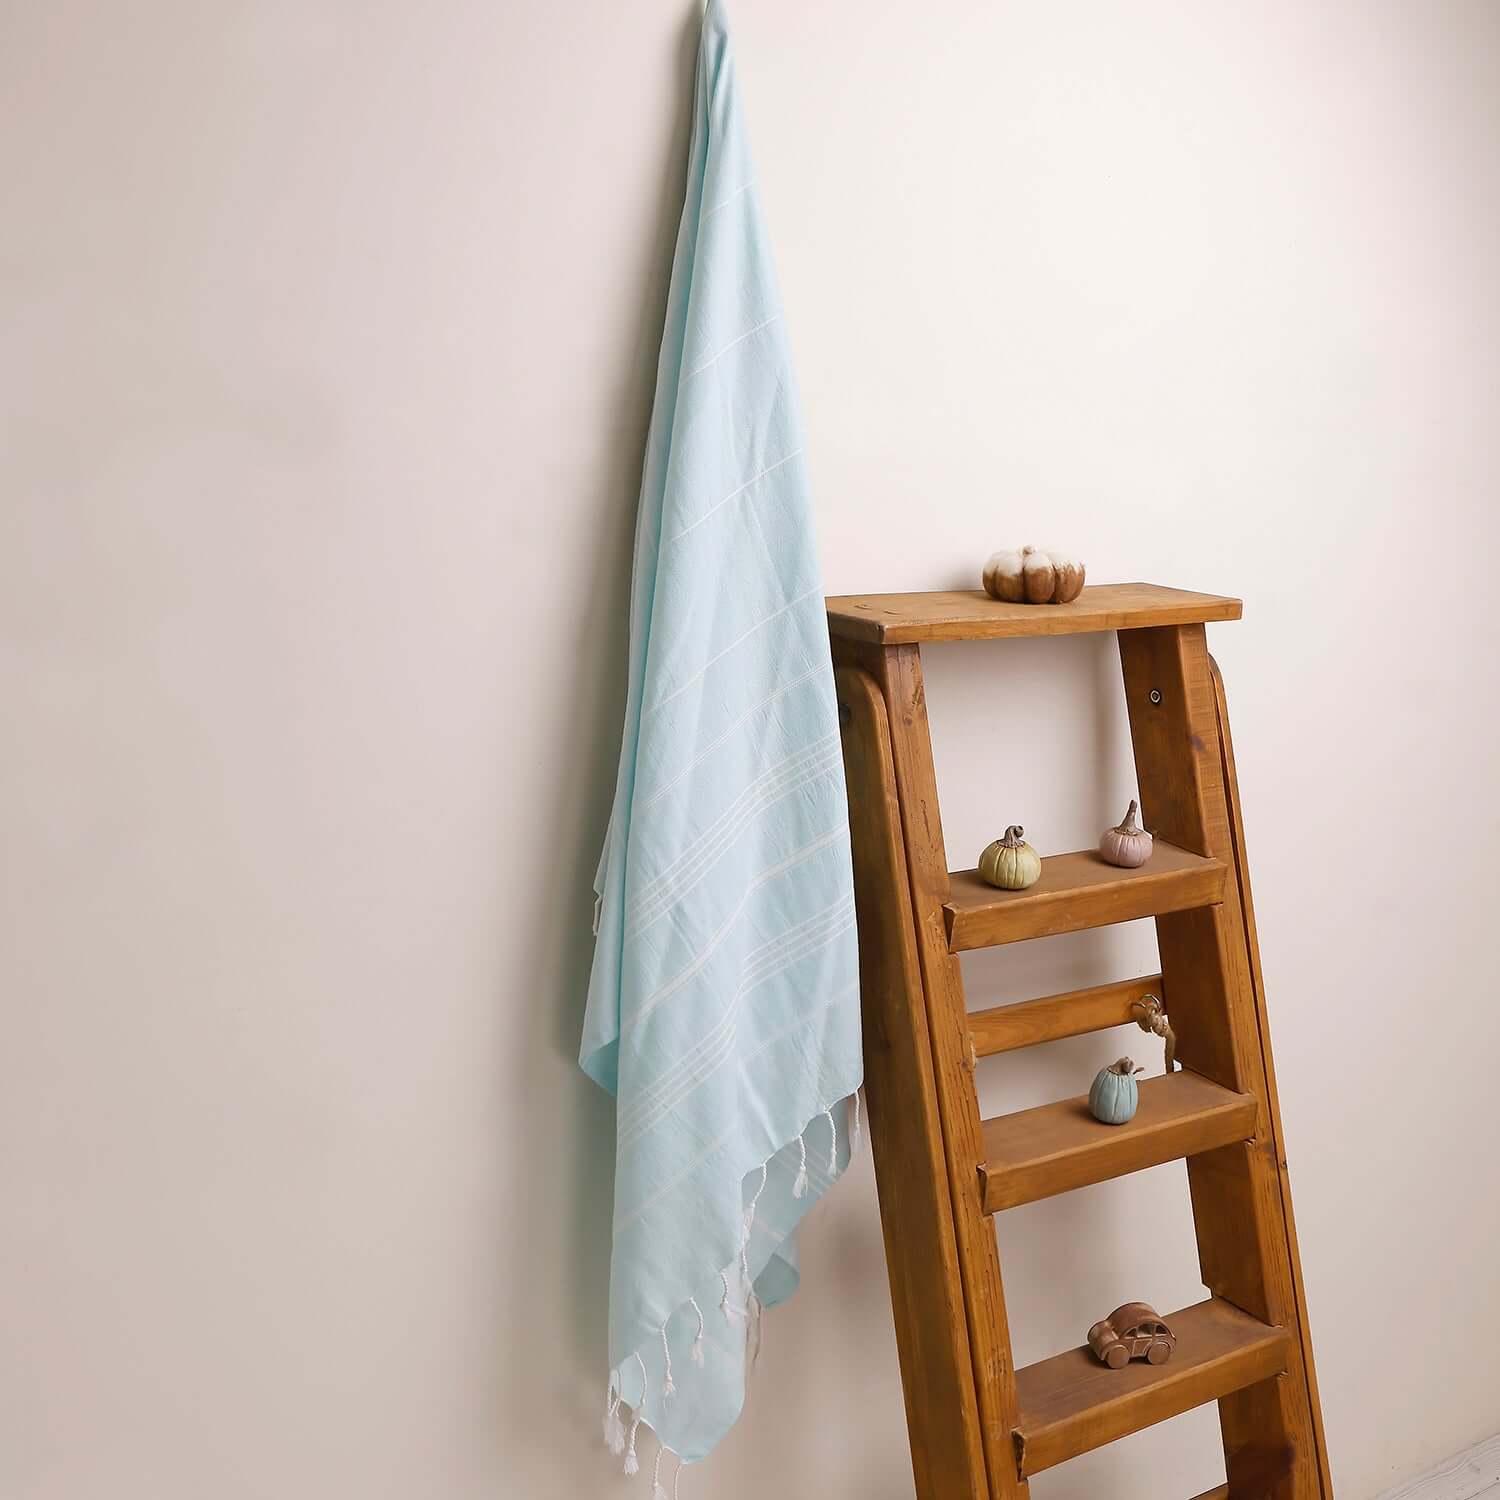 Loom Legacy aqua striped beach towel with tassels, draped over a wooden ladder beside small decorative items on the shelves.